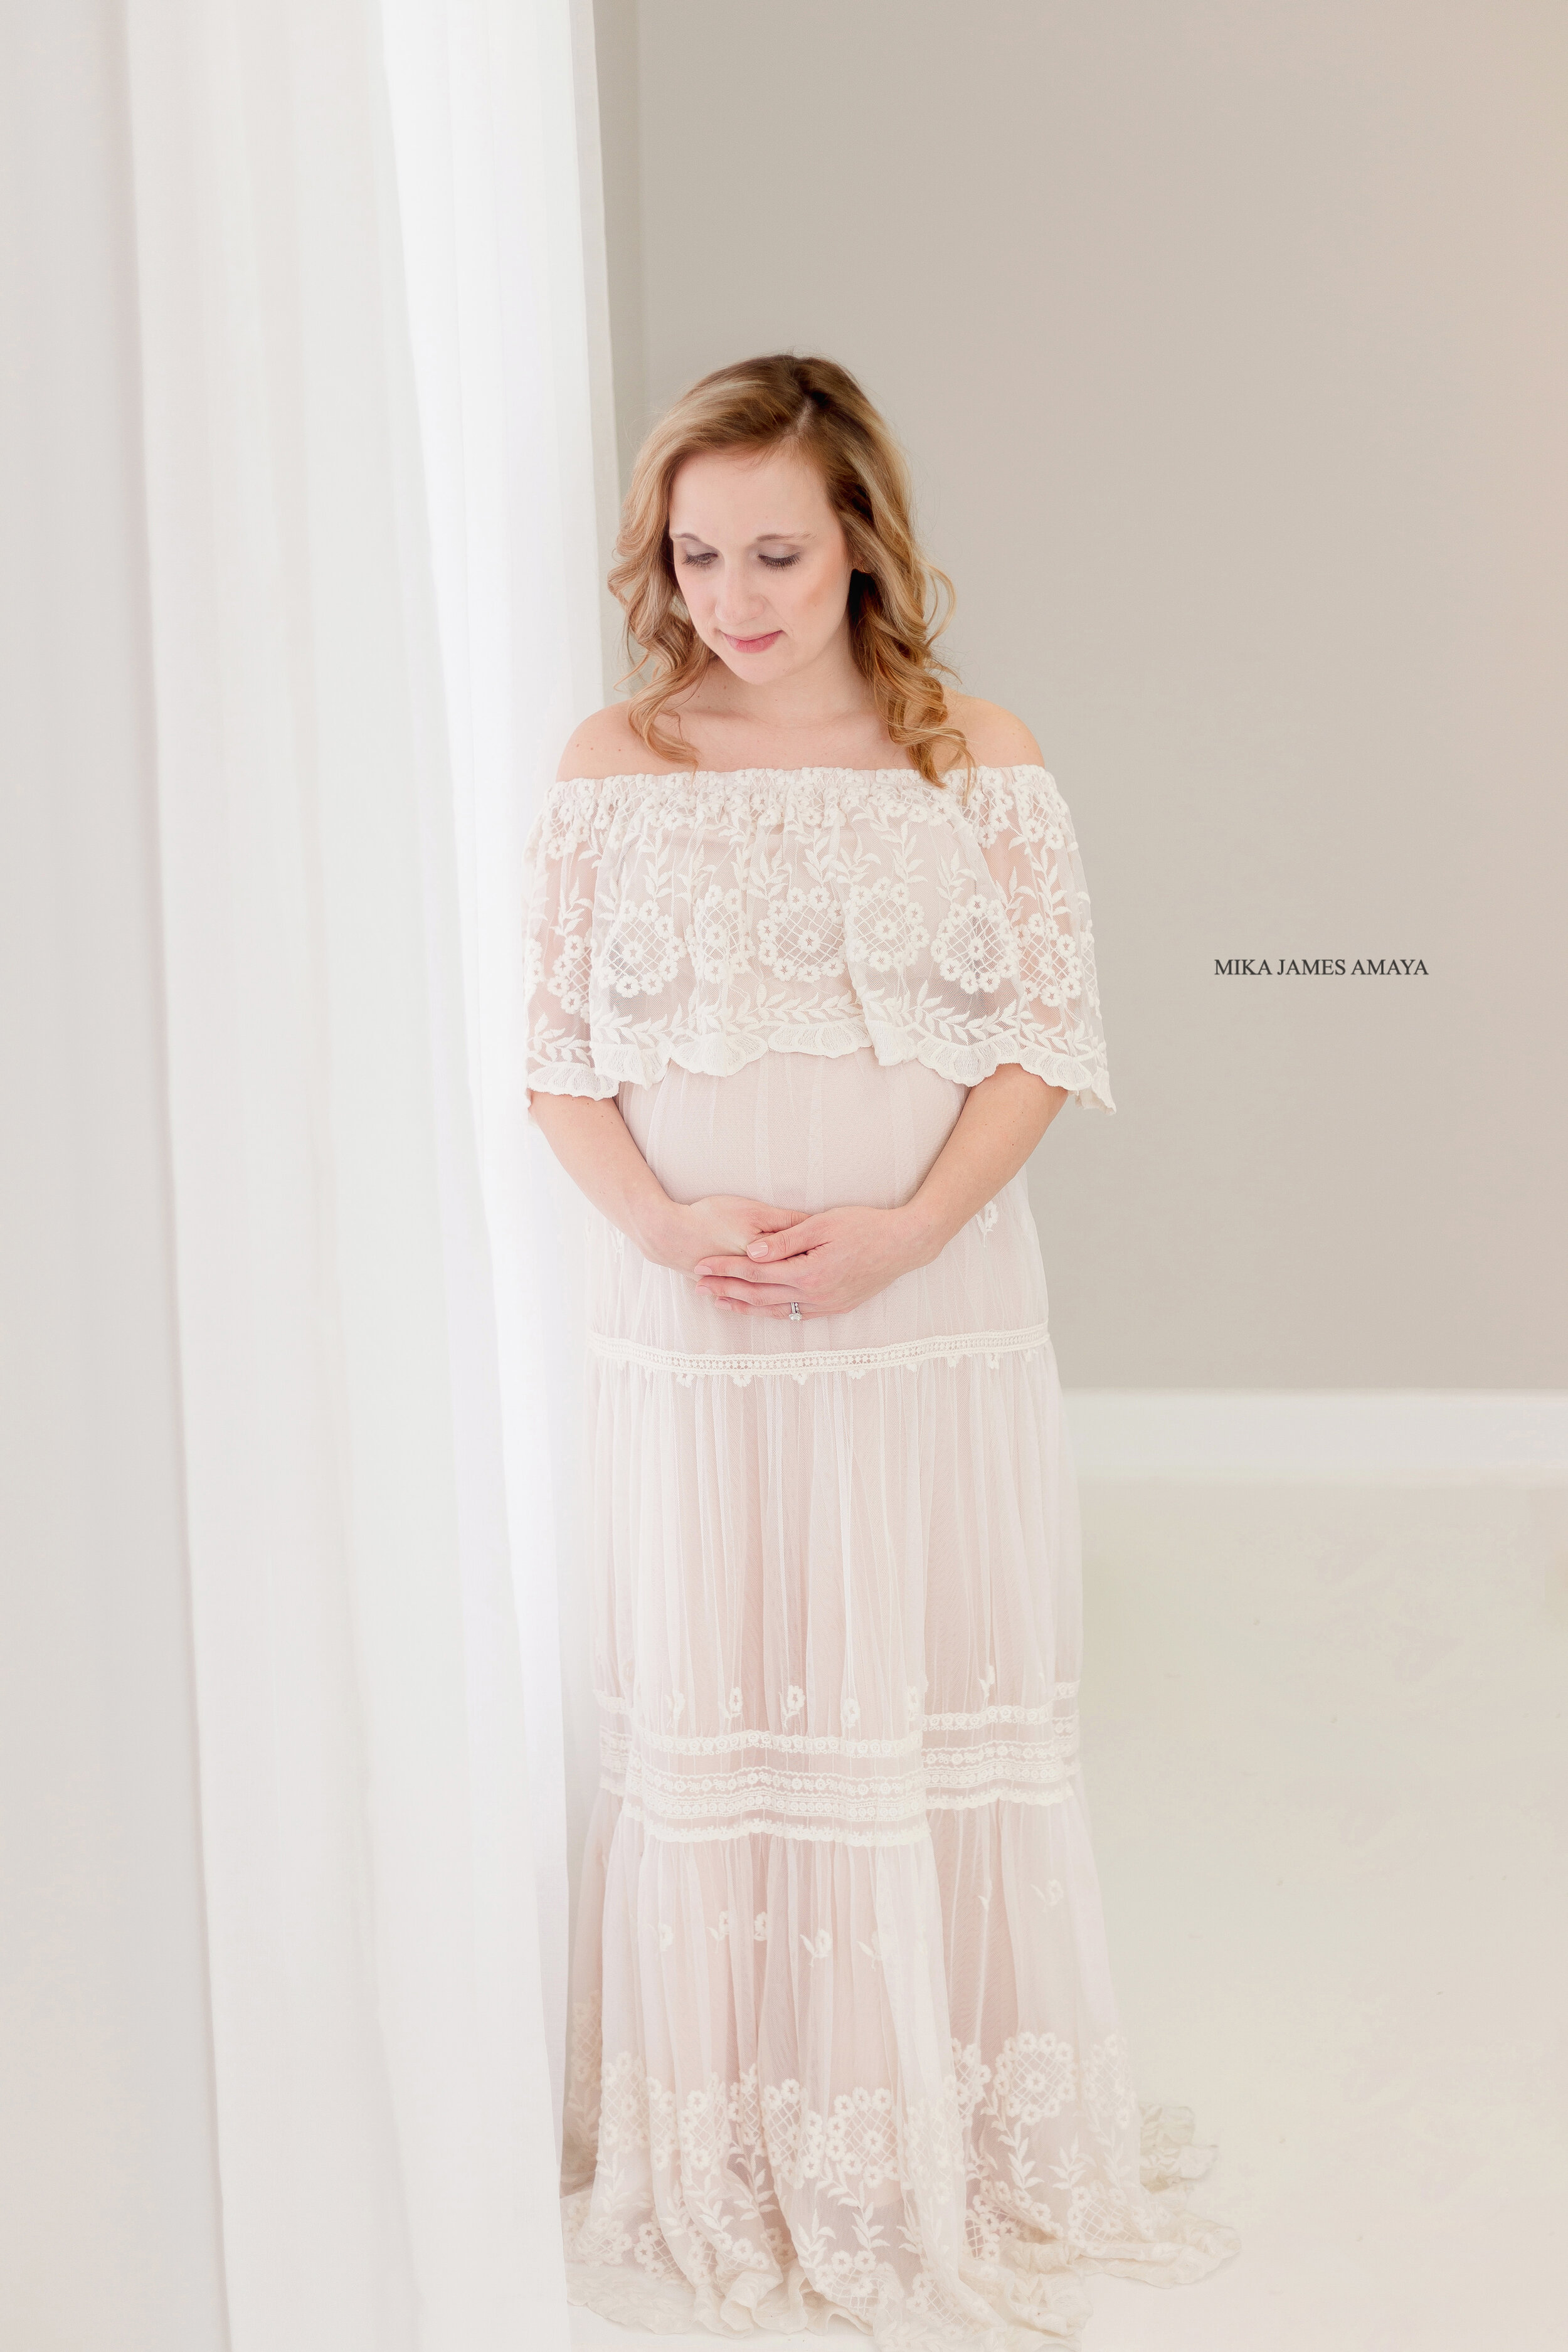 professional maternity photography raleigh nc